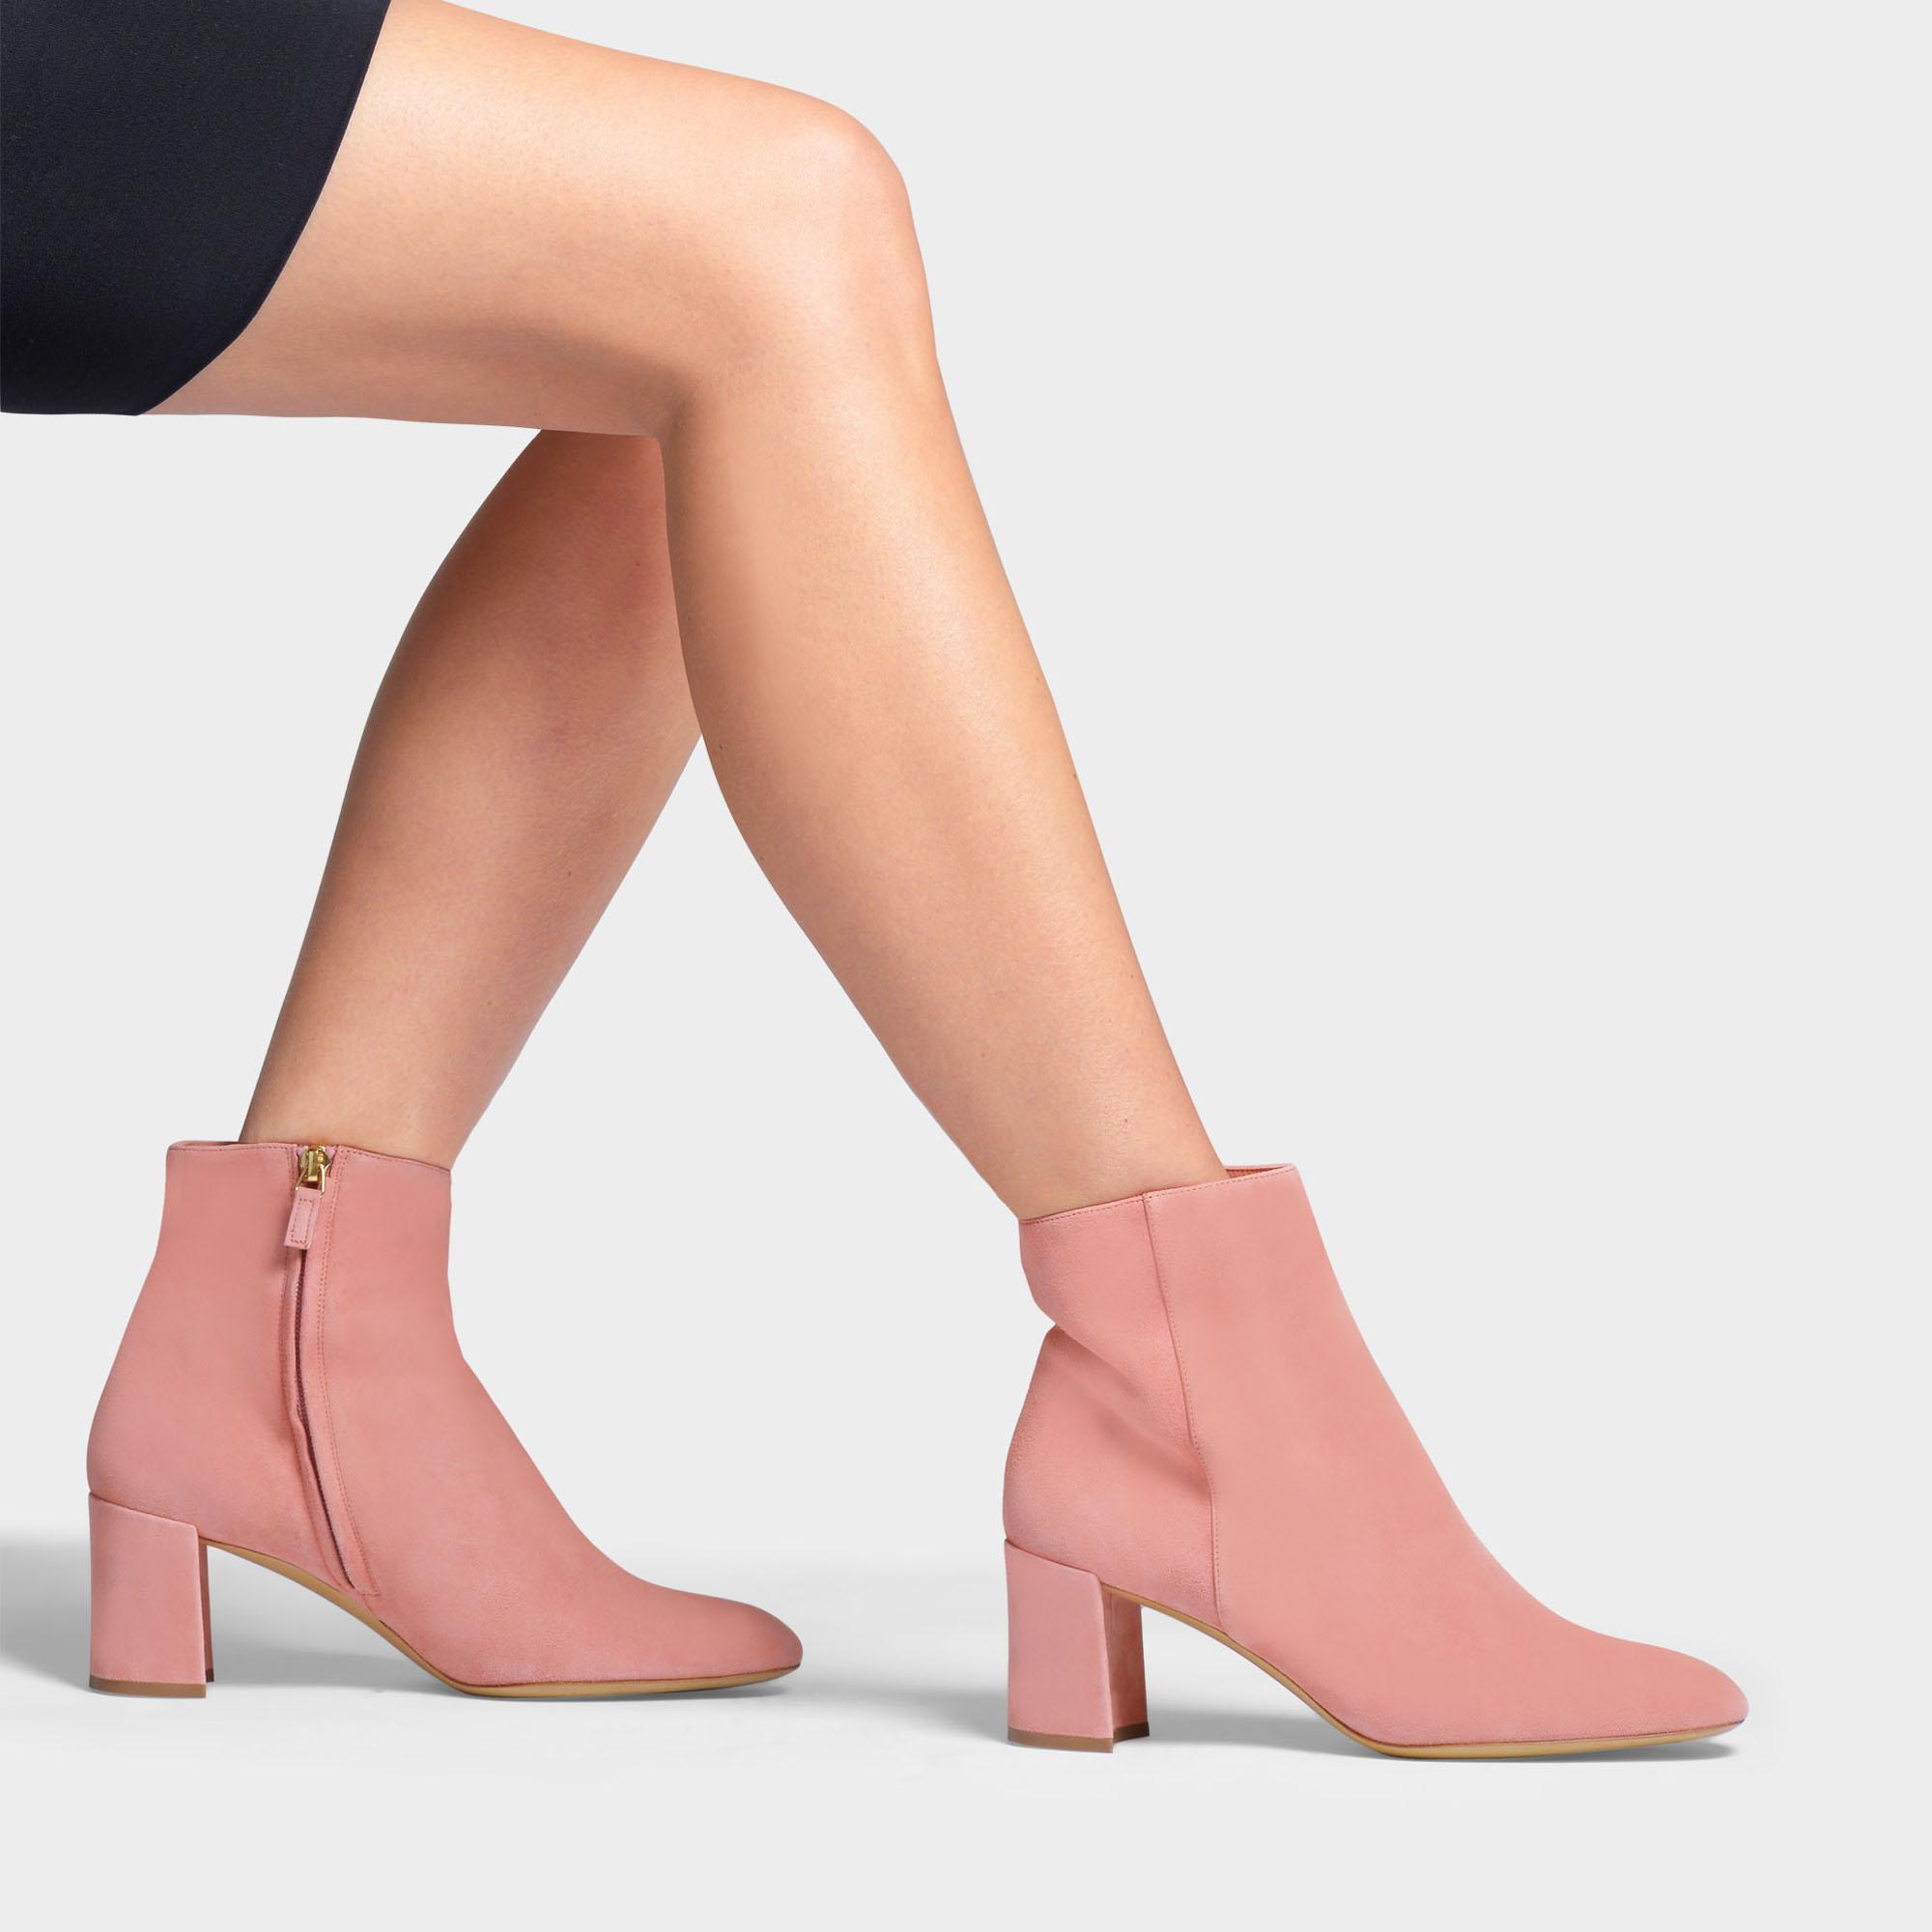 blush suede boots